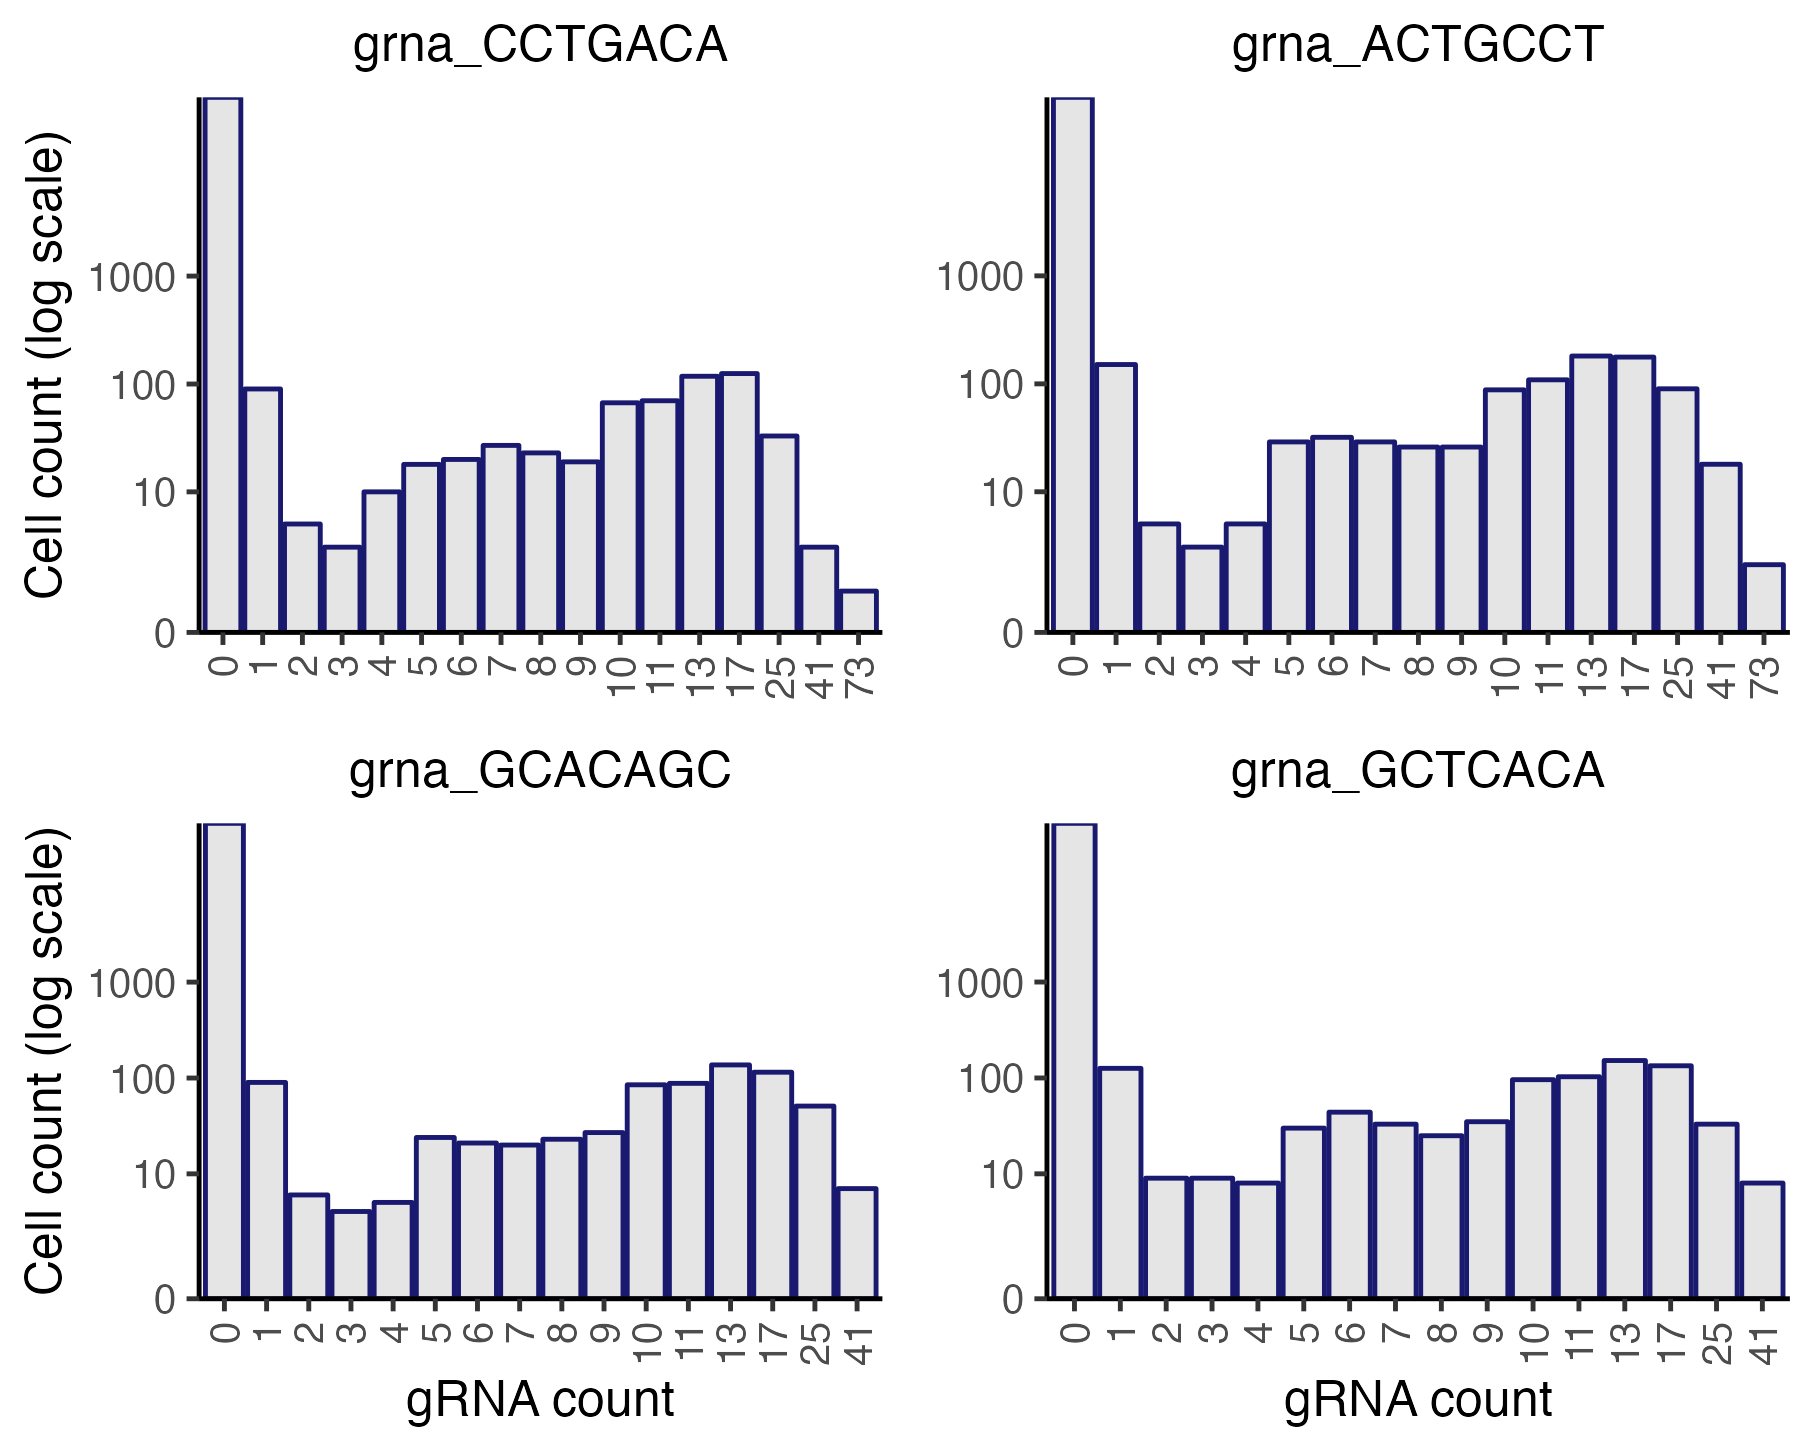 Histograms of the gRNA count distributions